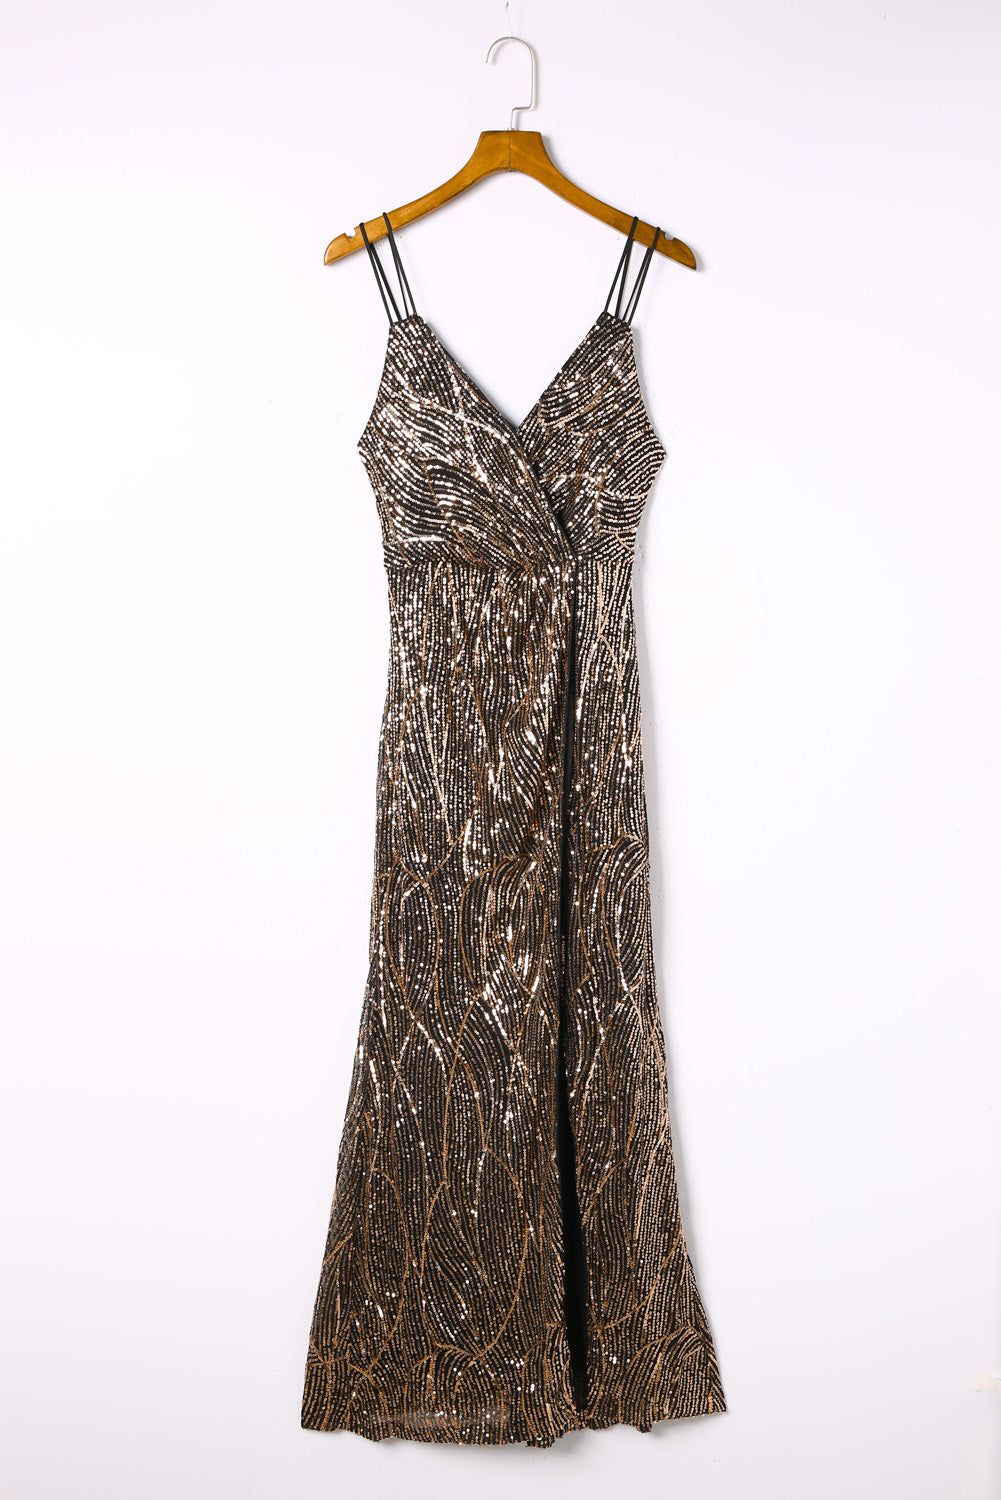 Brown Wrap V Neck Dual Spaghetti Straps Backless Sequin Maxi Evening Dress